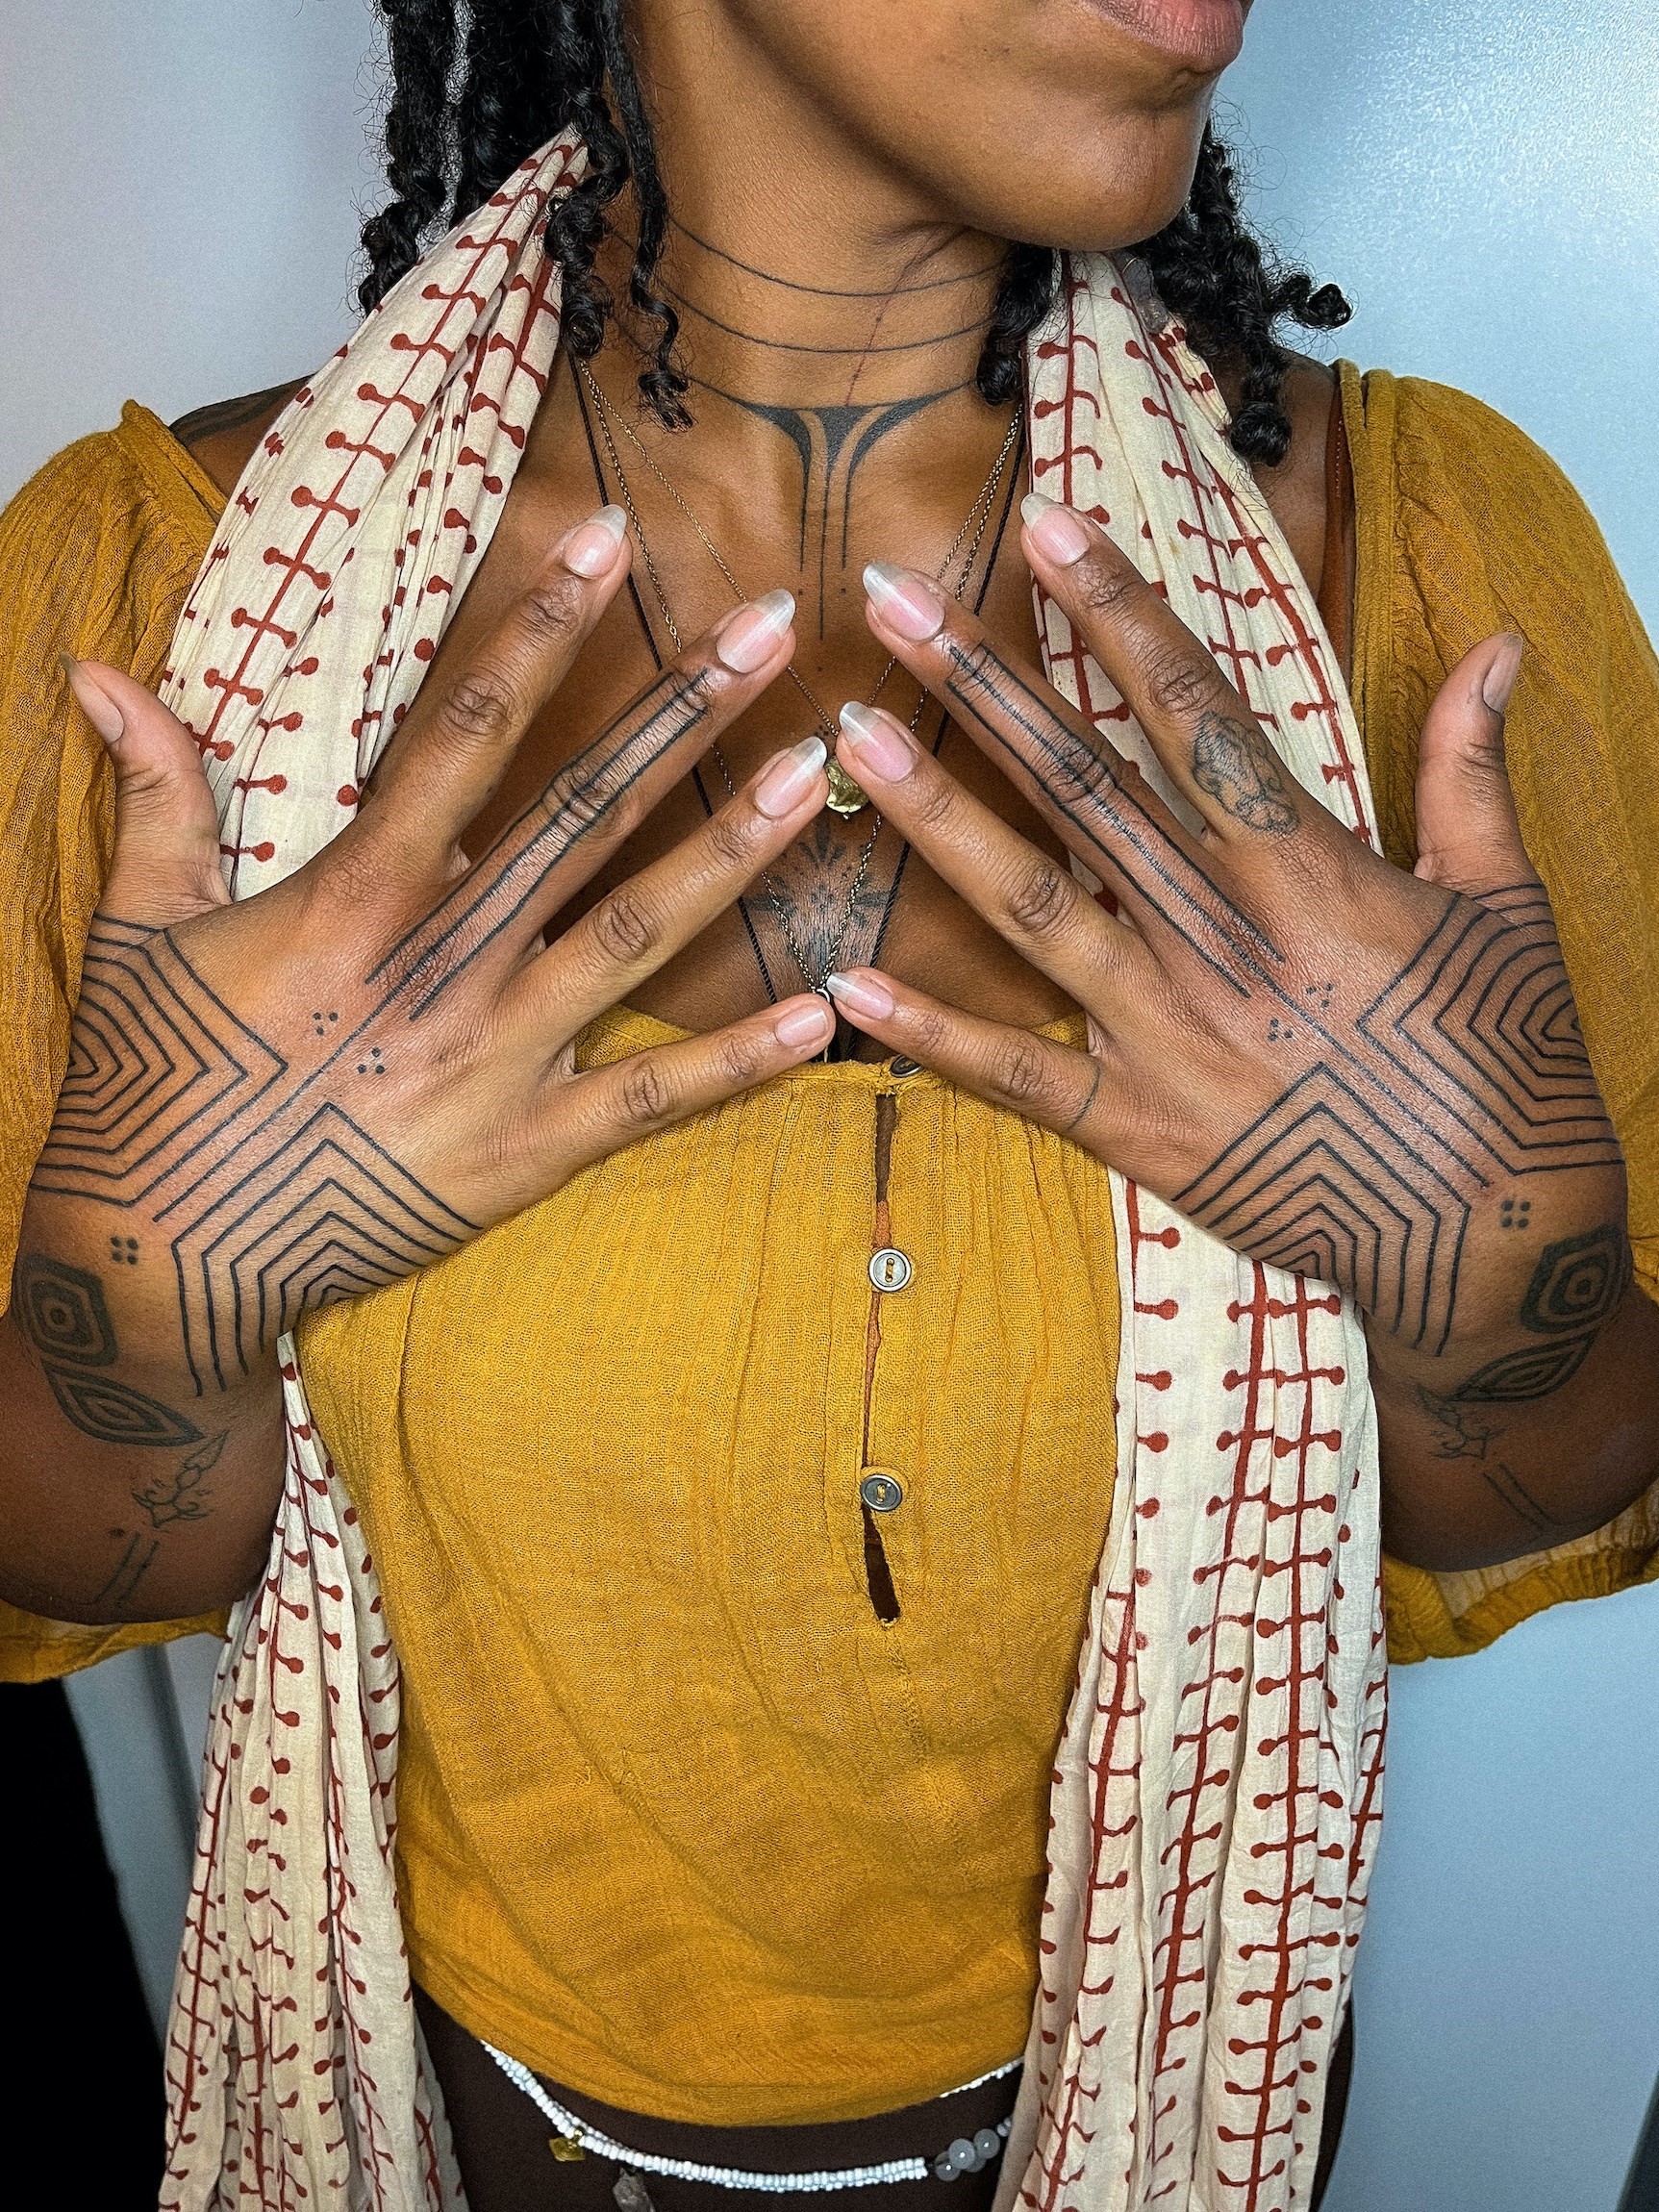 The tattoo artist connecting people with their West African heritage